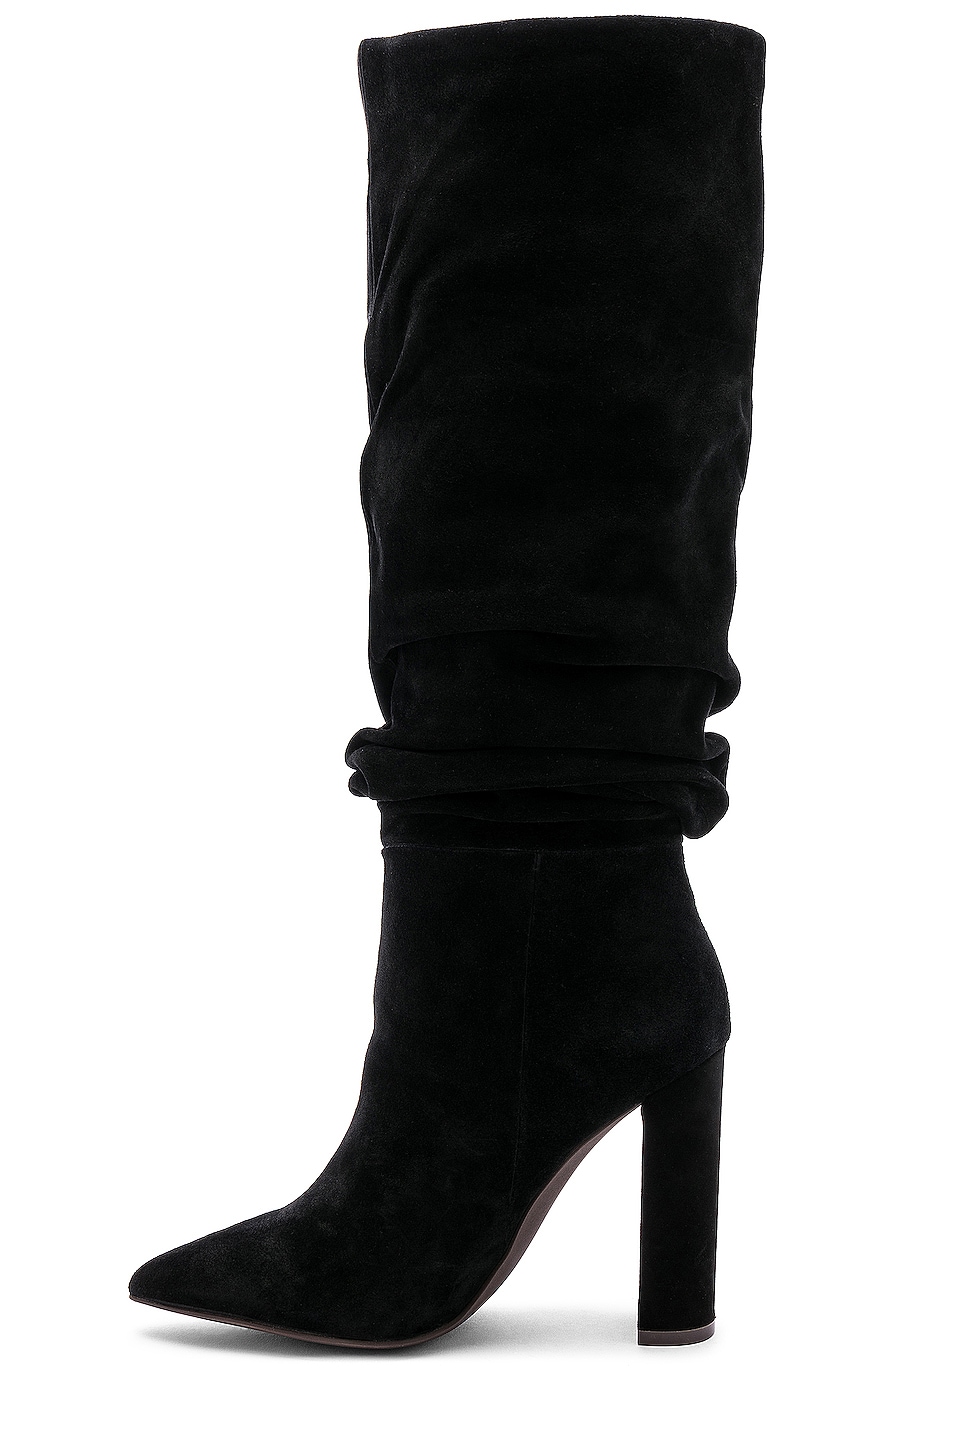 Steve Madden Swagger Boot in Black Suede | REVOLVE